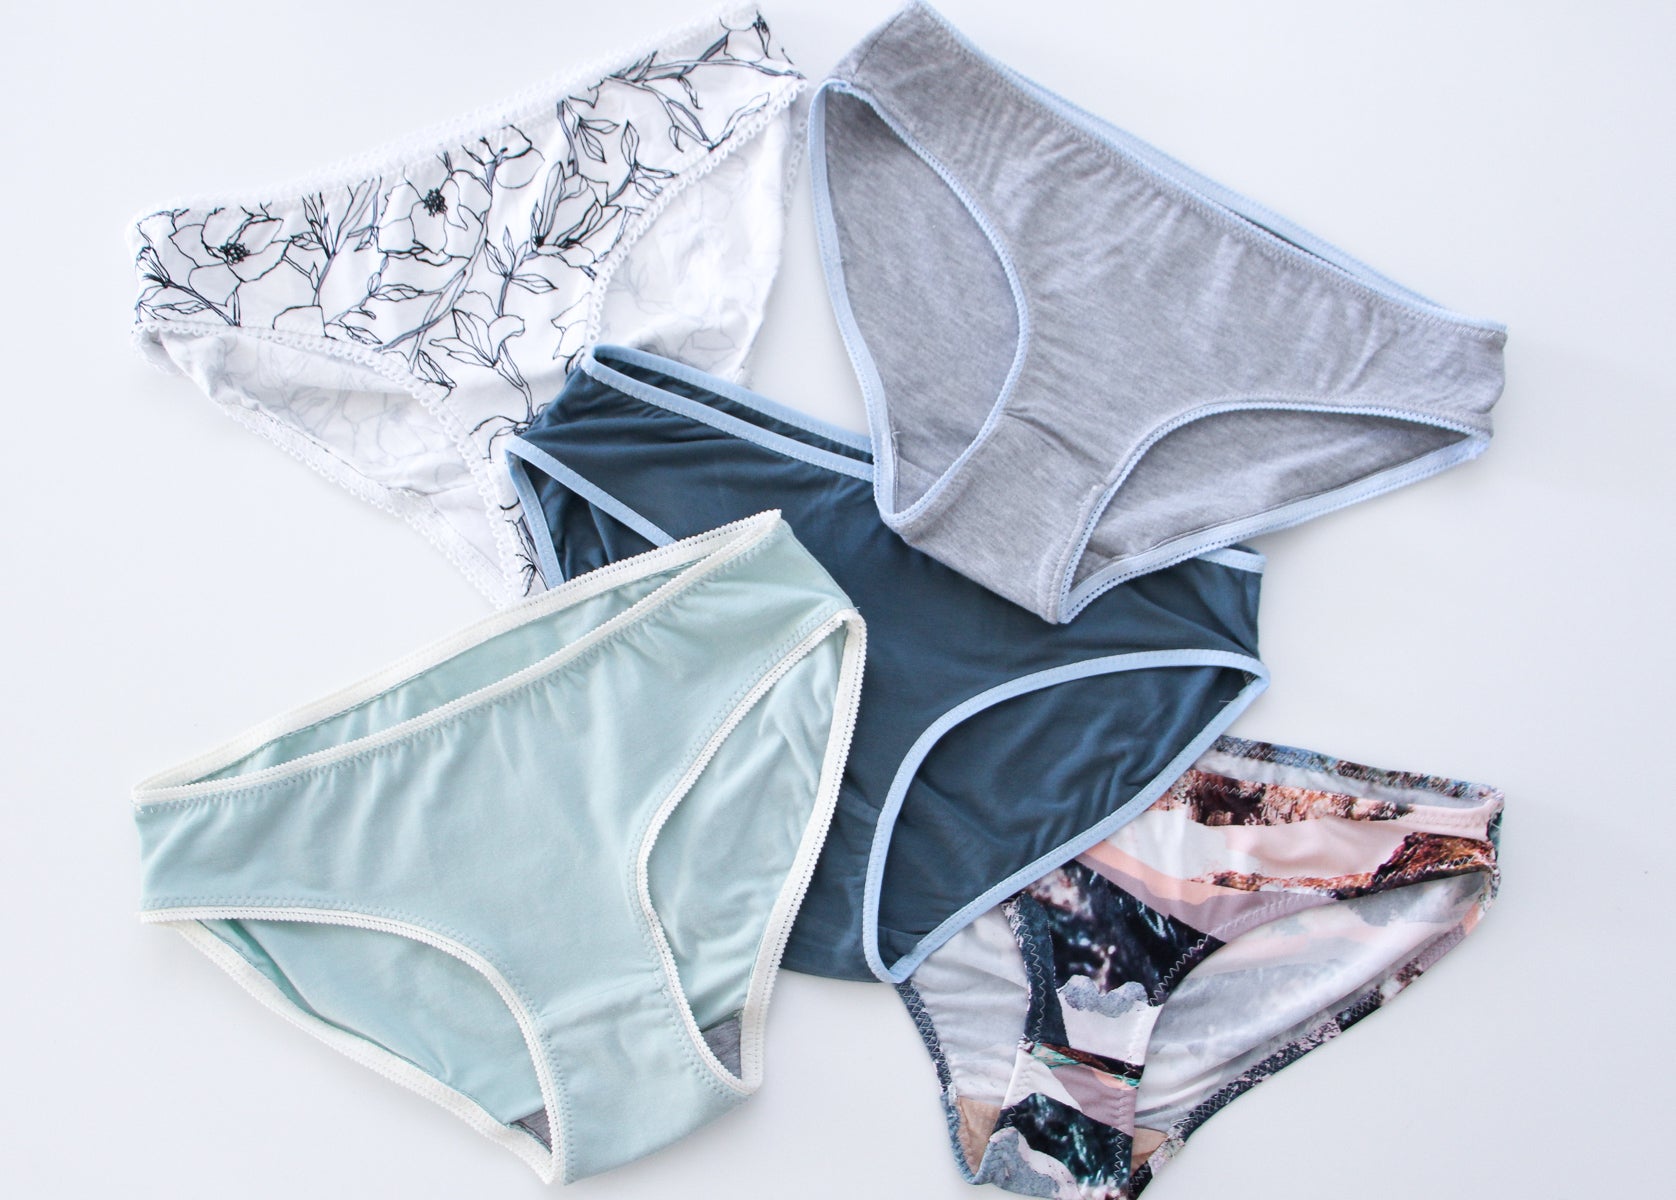 Acacia Underwear Sewing Pattern  FREE for Newsletter Subscribers – Megan  Nielsen